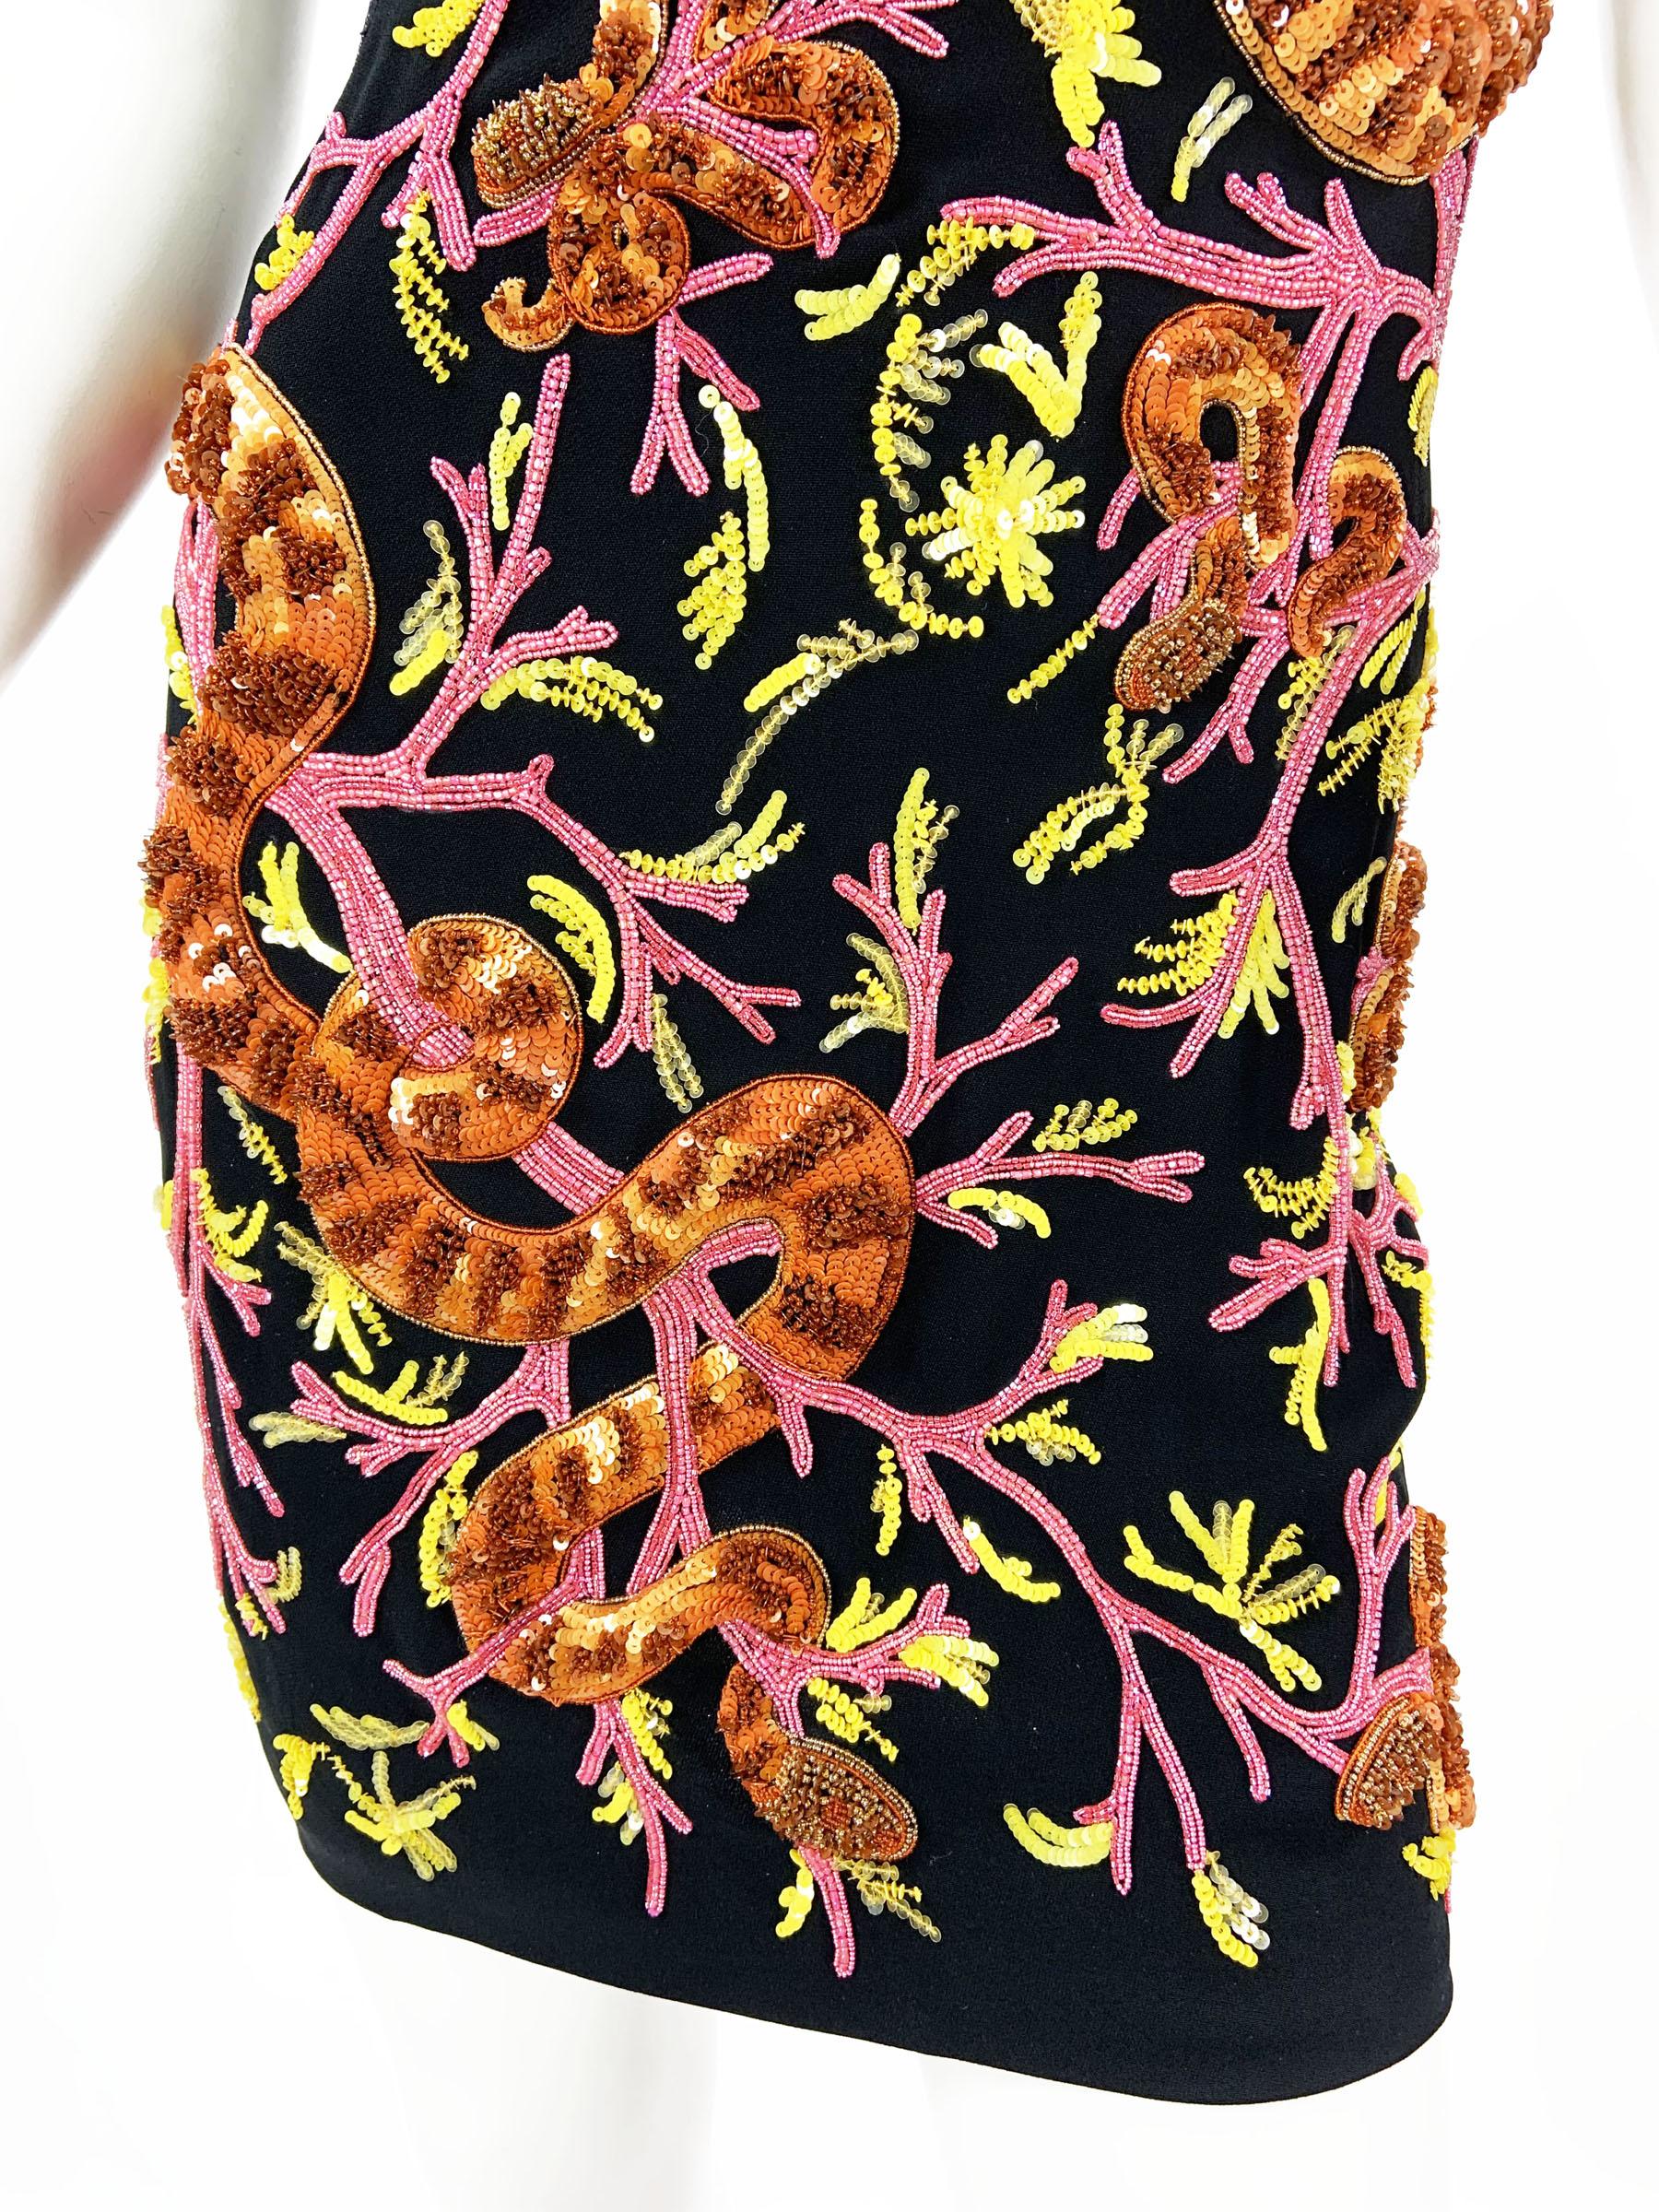 New Roberto Cavalli 3-D Snake Corals Embellished Lace Mini Dress Italian 38, 40 For Sale 4